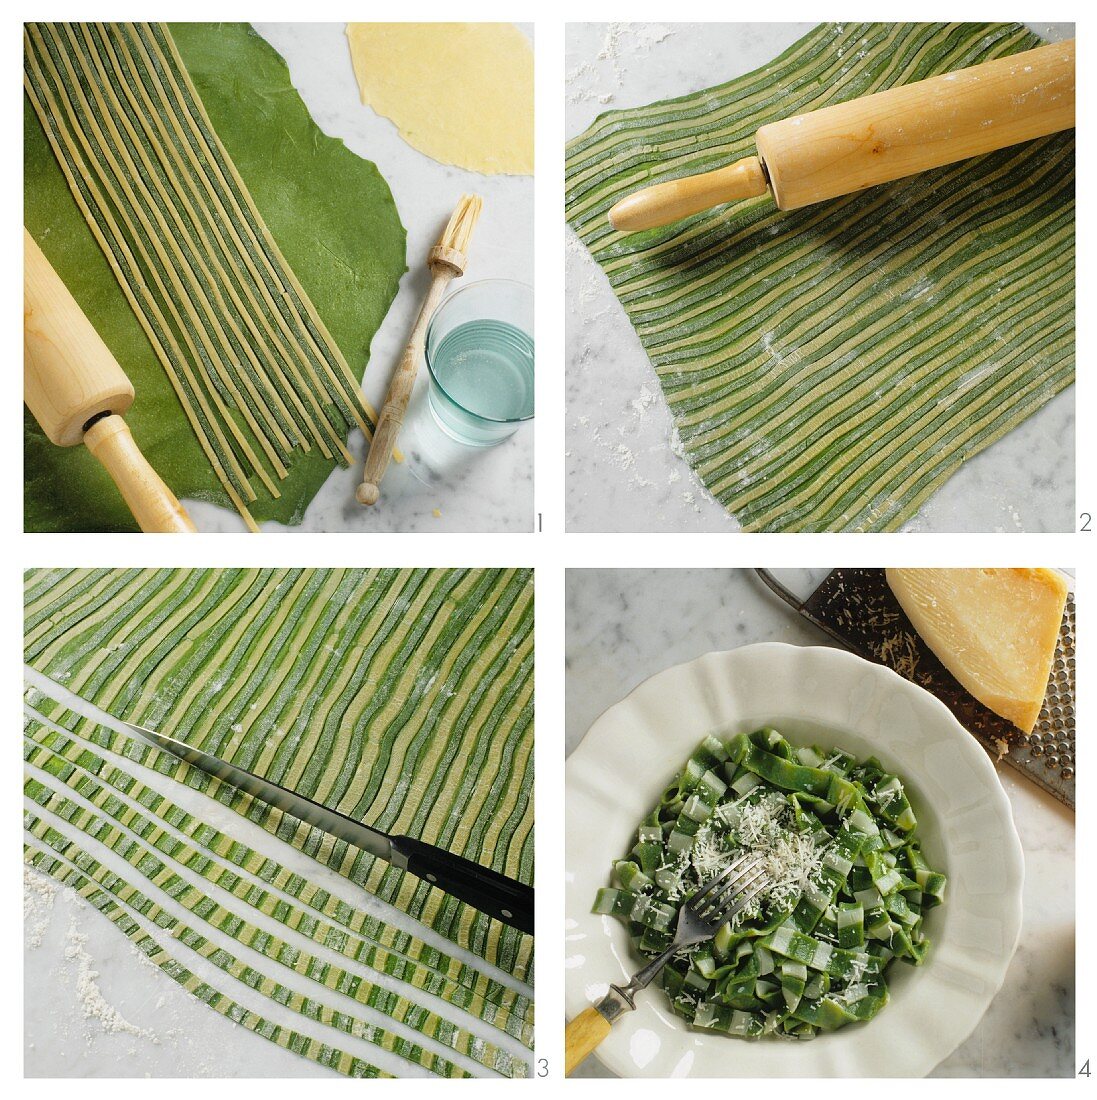 Making two-coloured noodles (green & white ribbon noodles)